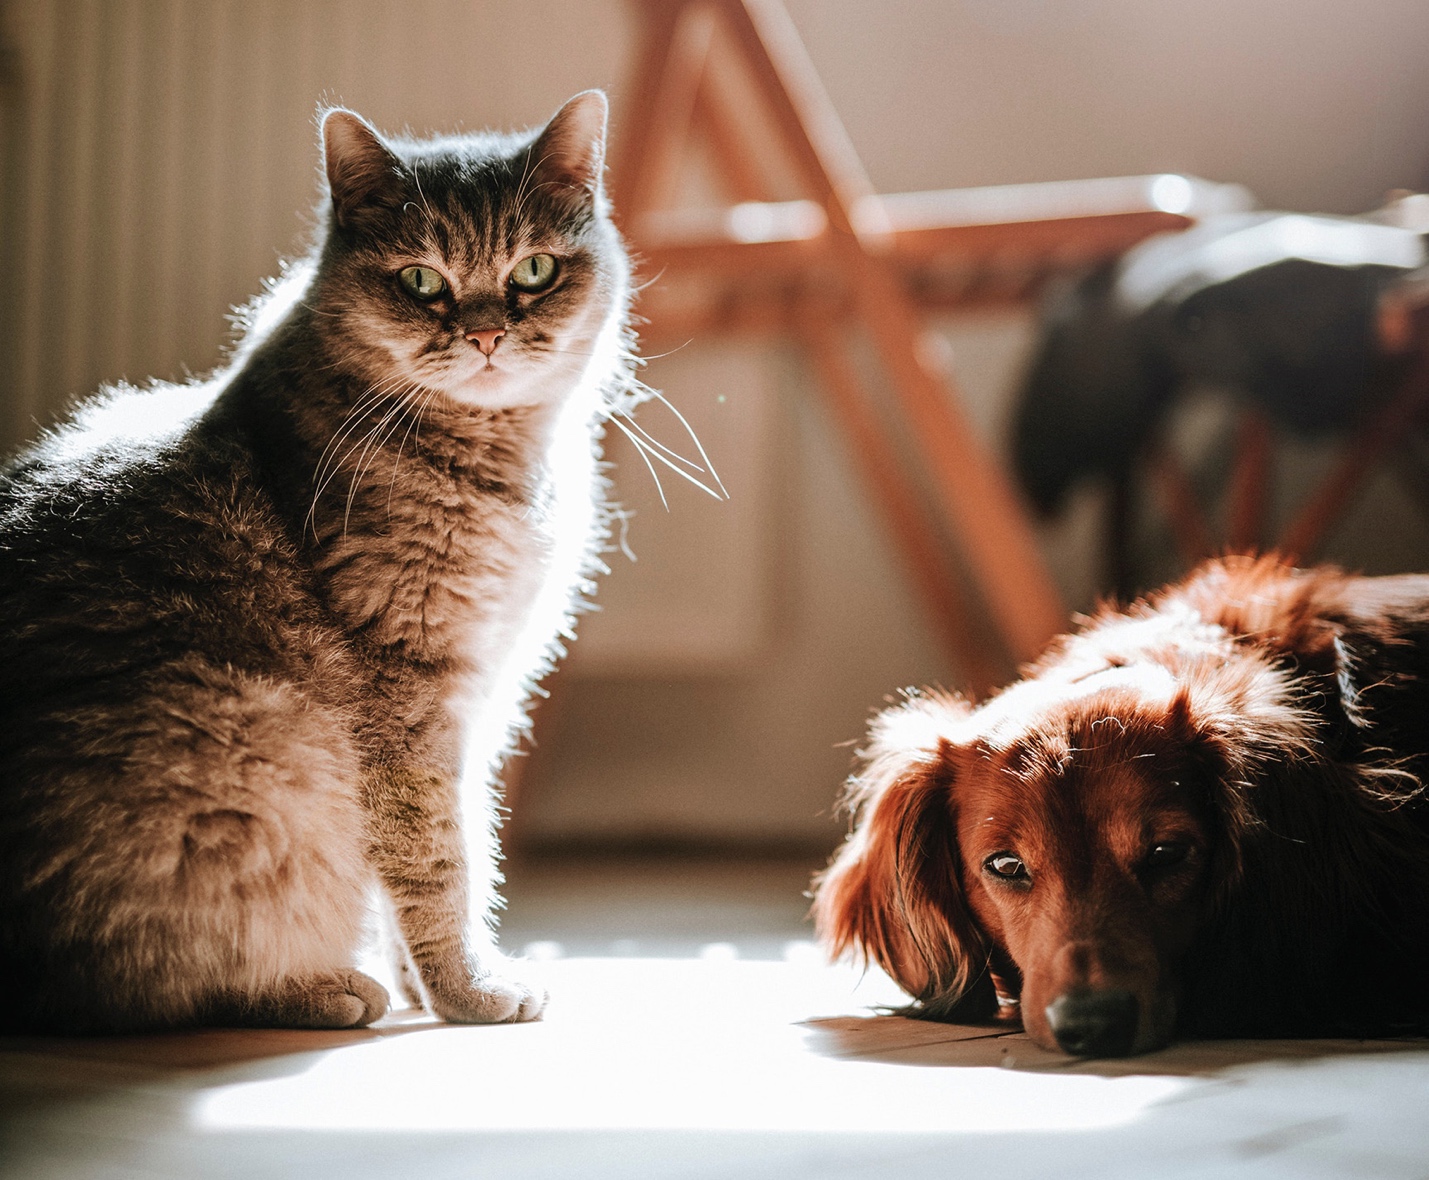 A cat and a dog

Description automatically generated with medium confidence